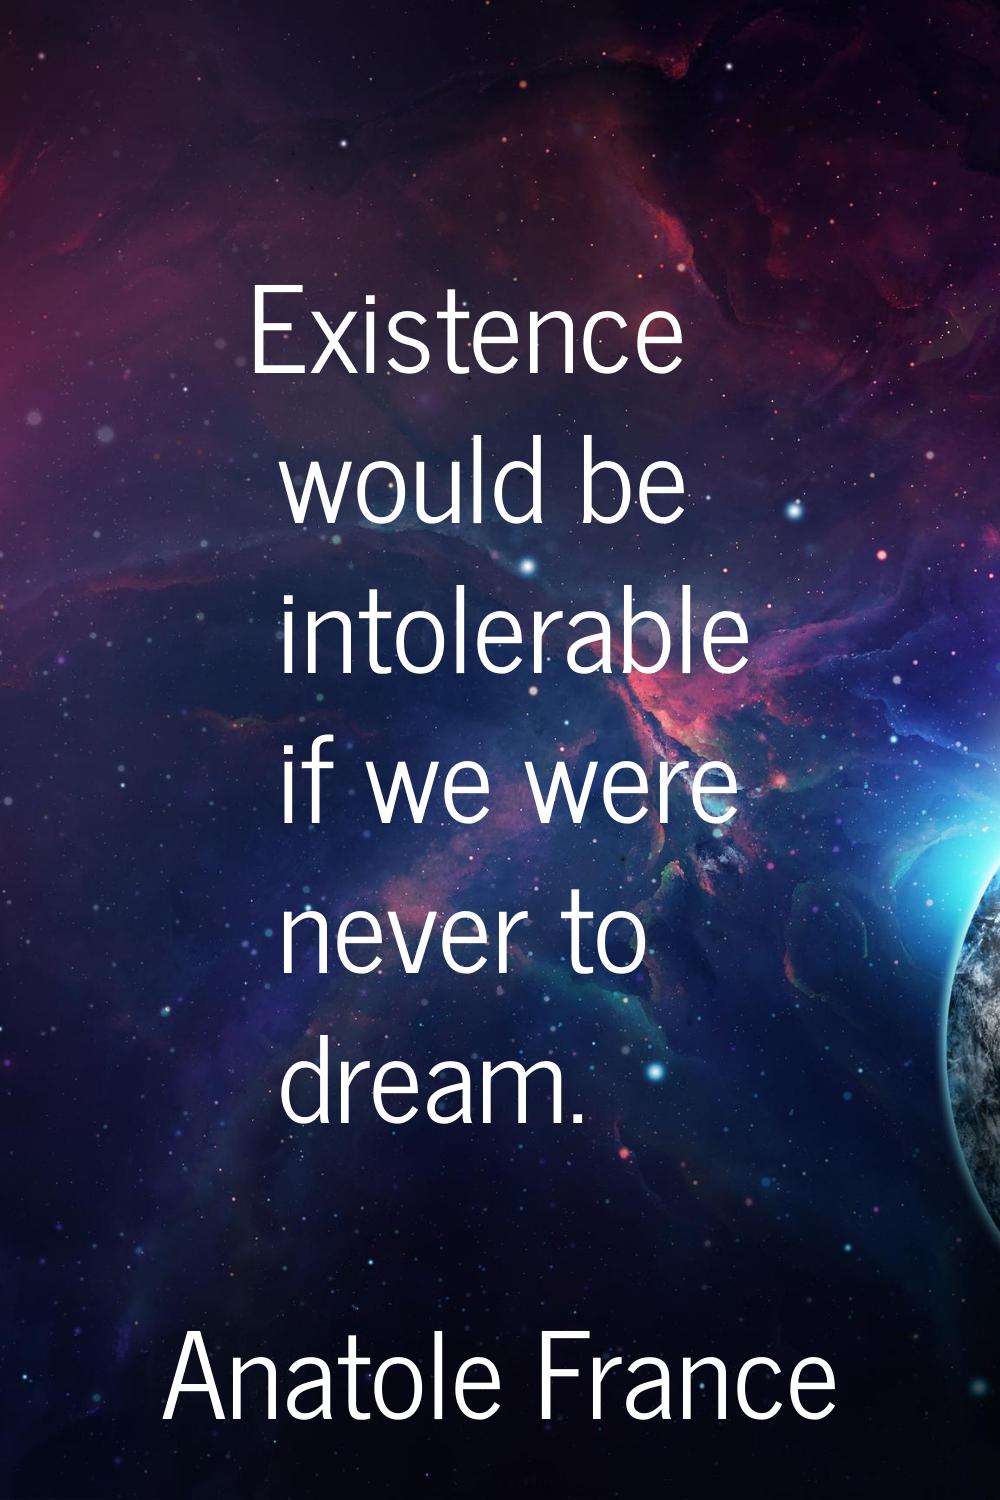 Existence would be intolerable if we were never to dream.